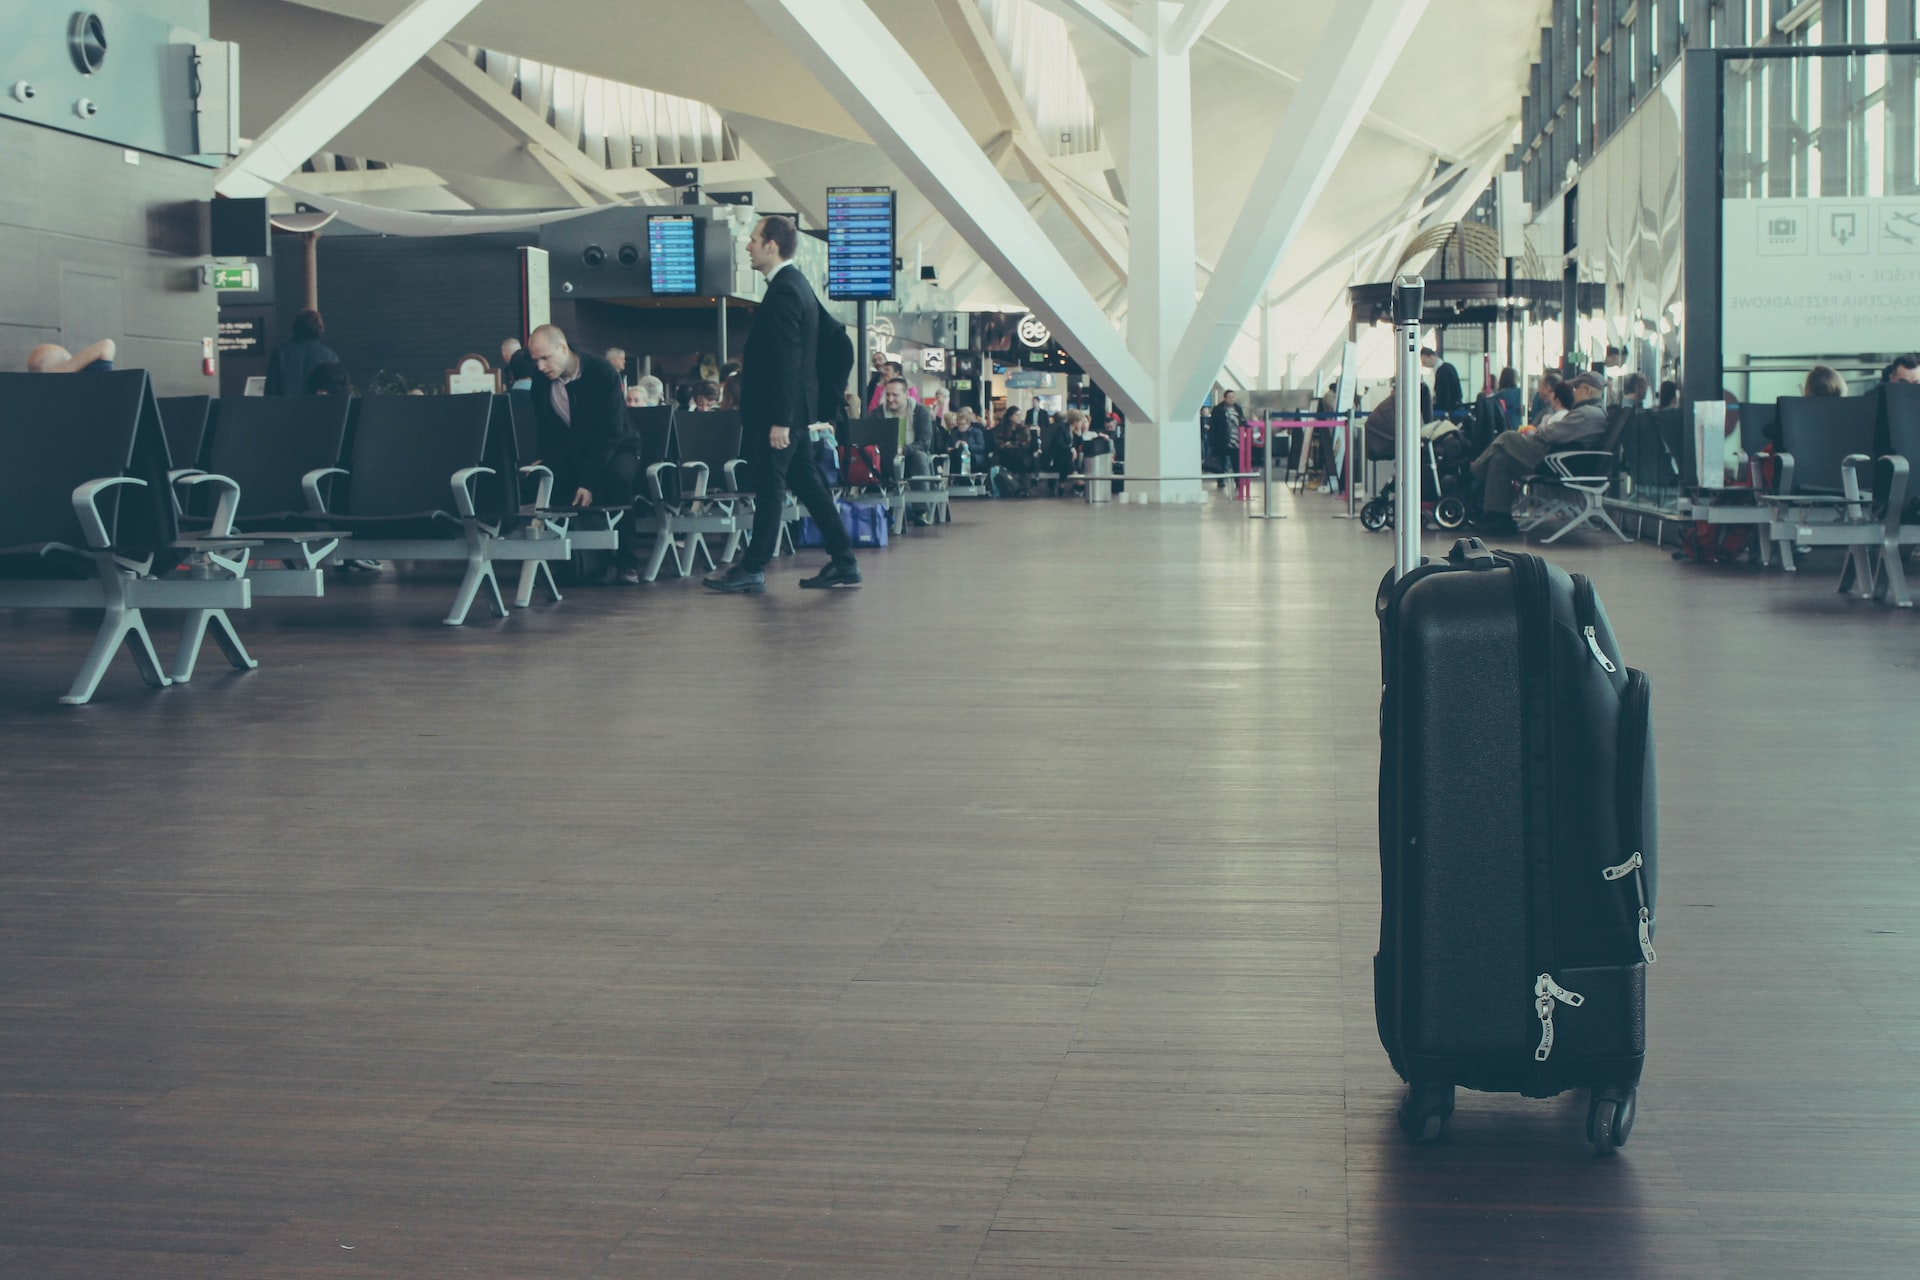 Lost items at an airport terminal: a black suitcase standing without its owner.